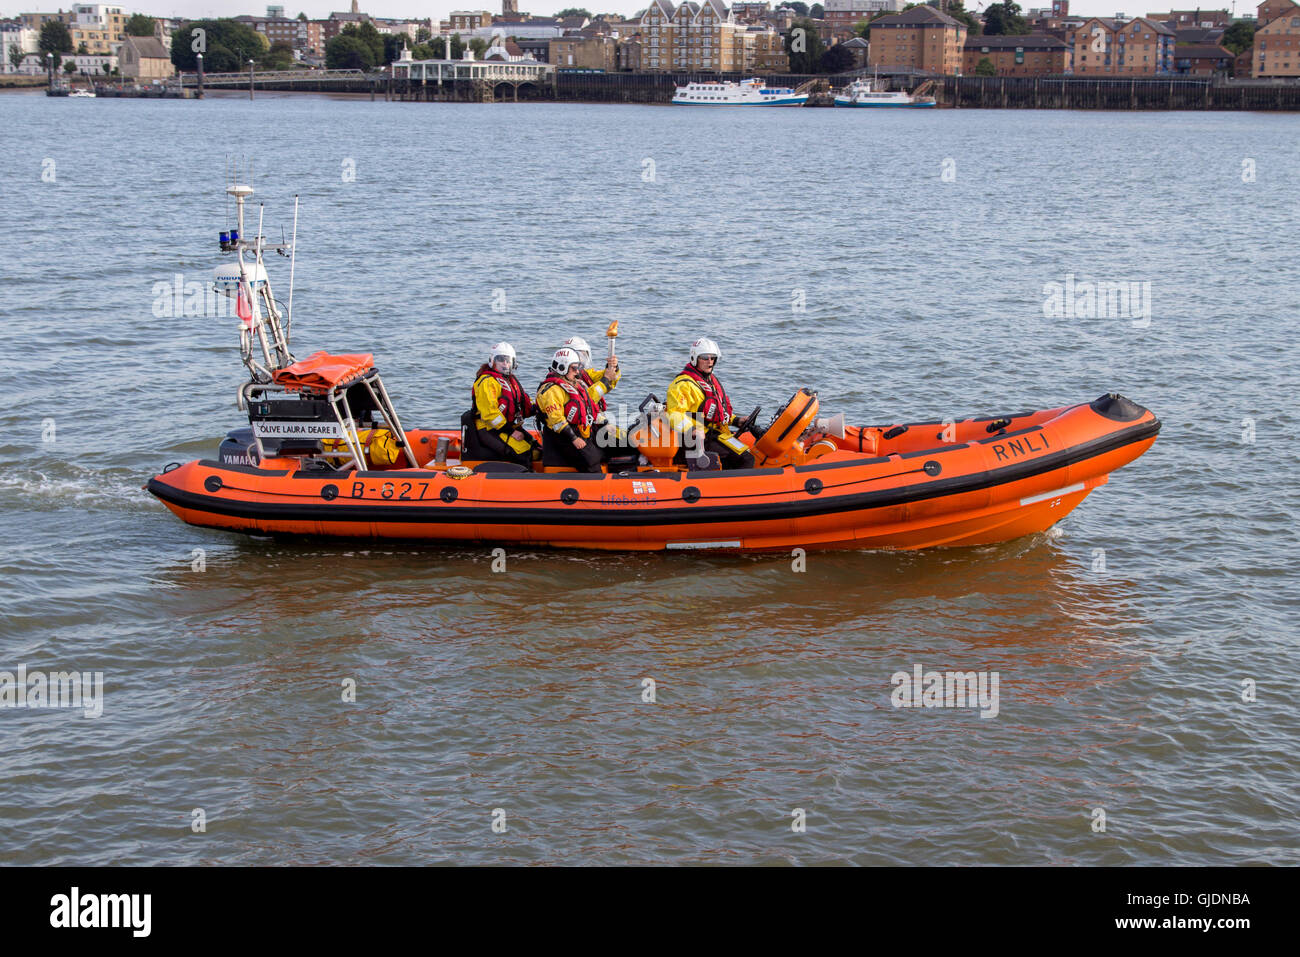 Essex-Uk - Royal Air Force Air Cadets celebrate 75th Anniversary with torch relay though Essex, UK. 14th Aug, 2016. The torch is handed over to the RNLI to take to kent wing across the themes. Credit:  darren Attersley/Alamy Live News Stock Photo